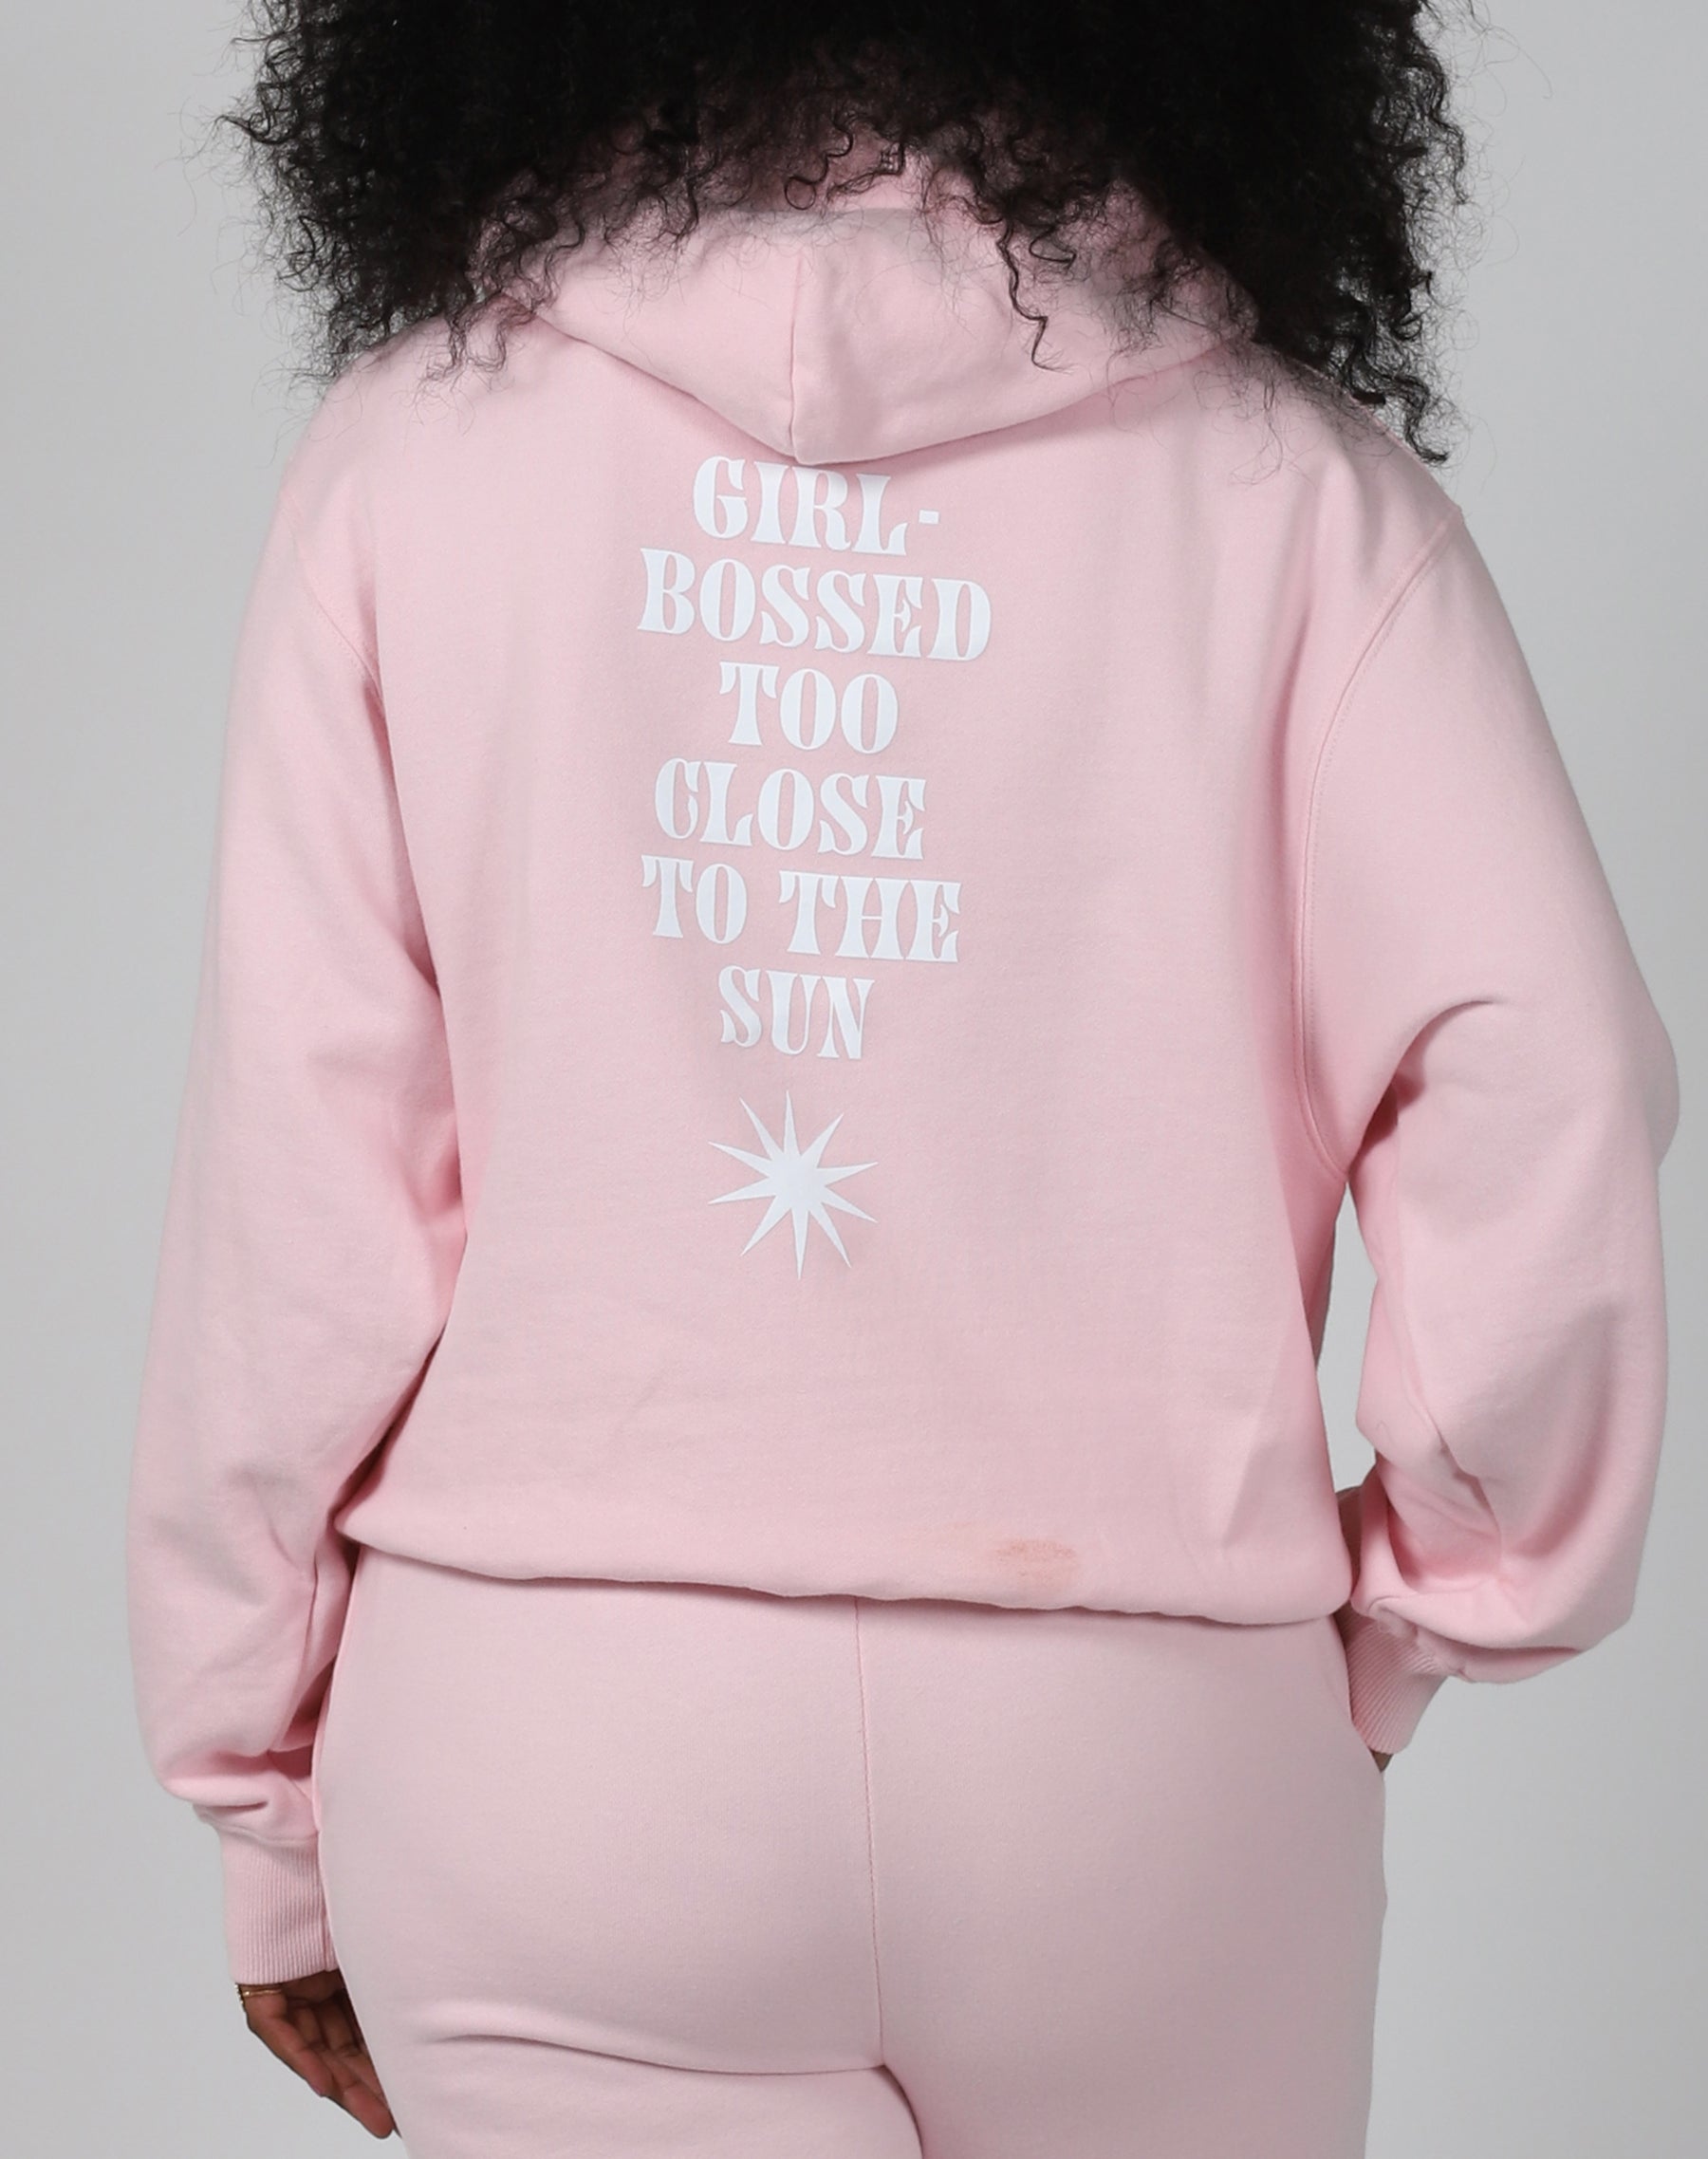 The "TOO CLOSE TO THE SUN" Best Friend Hoodie | Girlboss x Brunette the Label